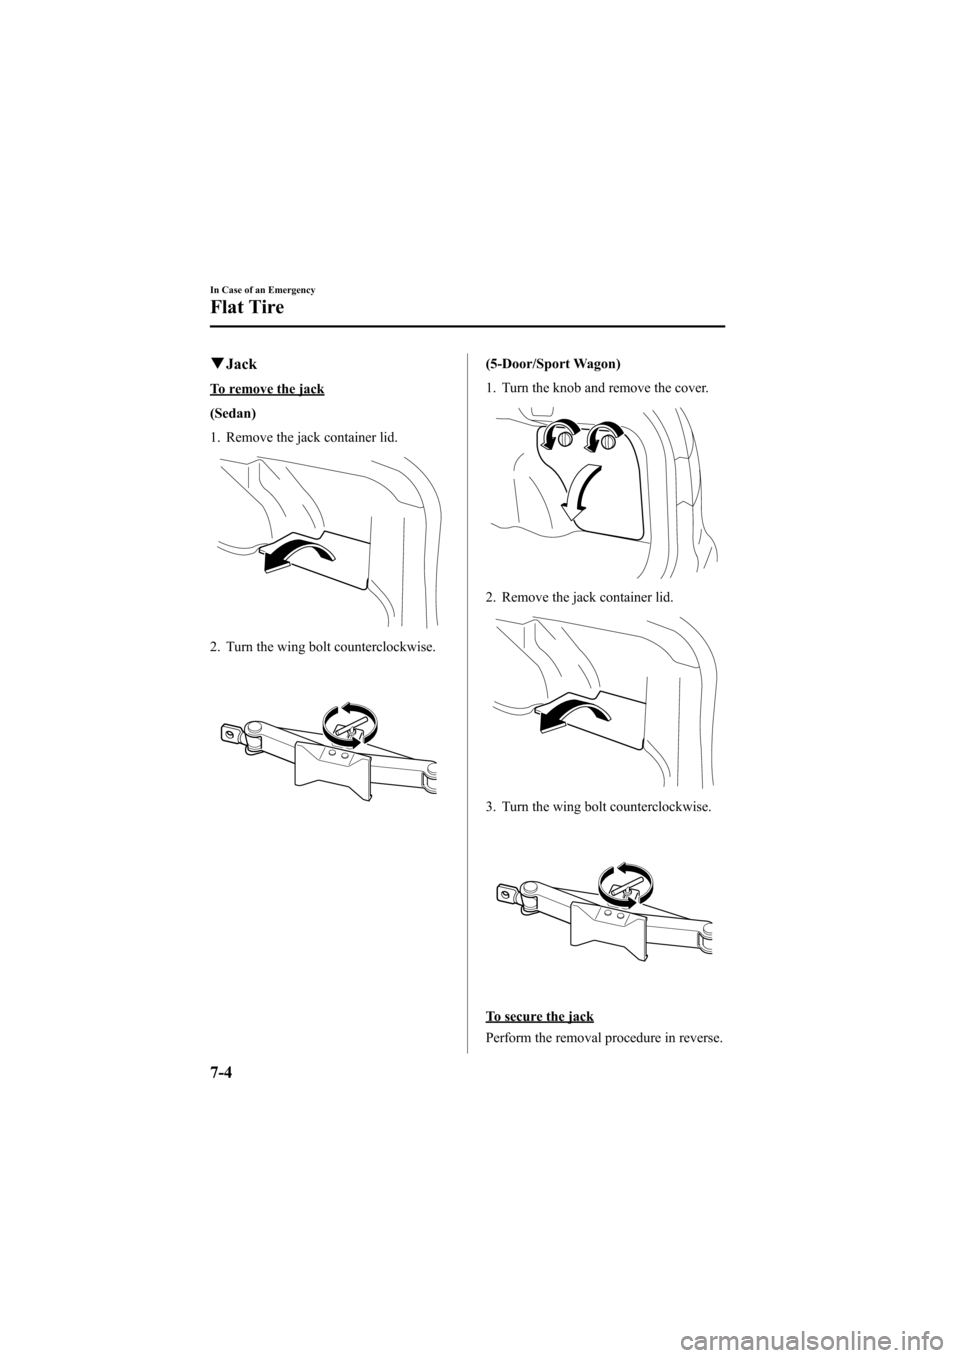 MAZDA MODEL 6 2005  Owners Manual (in English) Black plate (232,1)
qJack
To remove the jack
(Sedan)
1. Remove the jack container lid.
2. Turn the wing bolt counterclockwise.
(5-Door/Sport Wagon)
1. Turn the knob and remove the cover.
2. Remove the